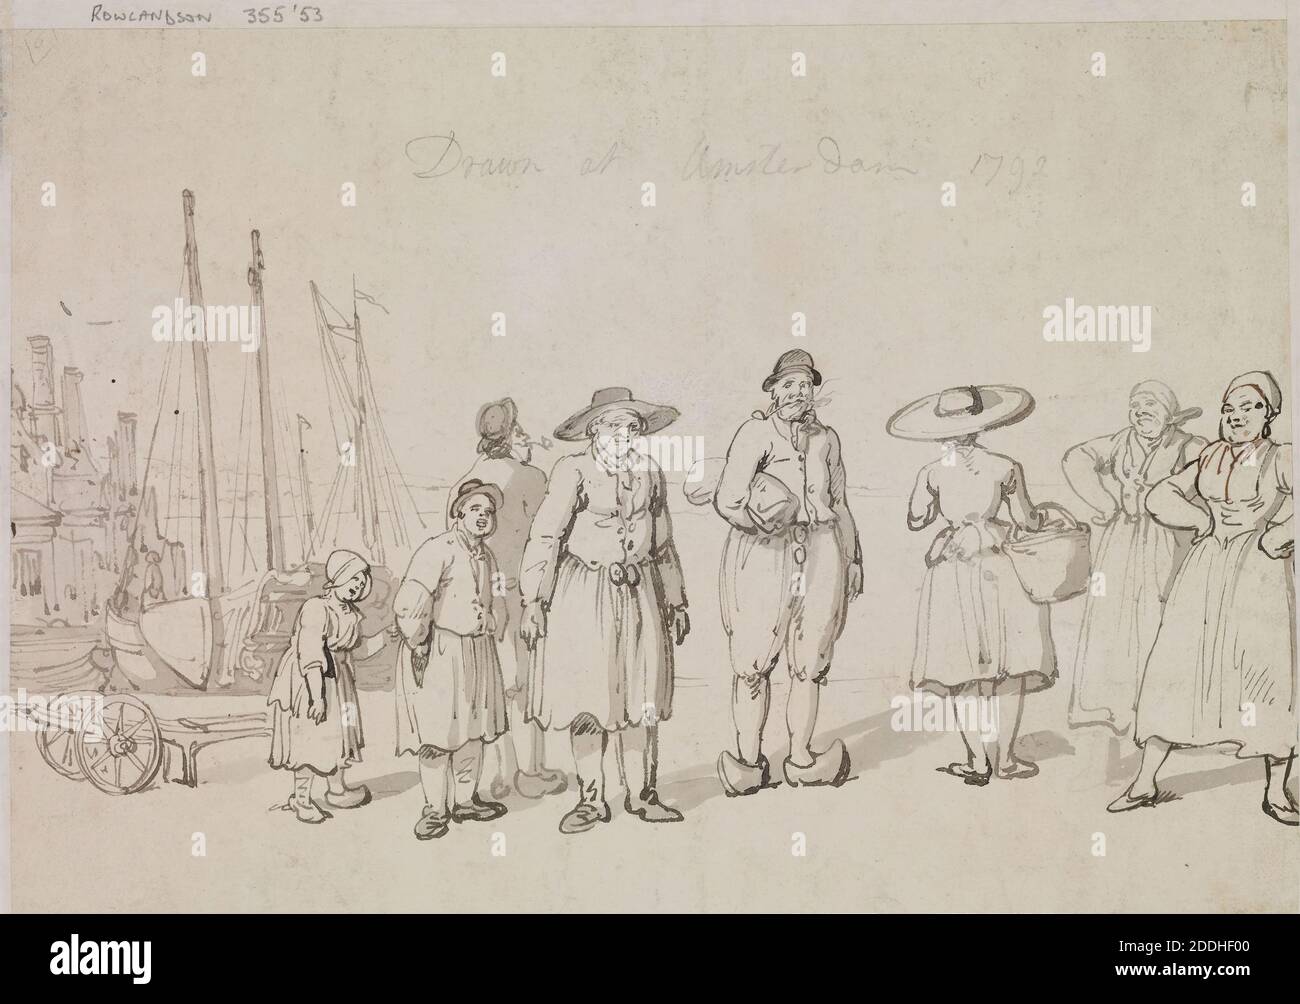 Verso Sketch of Dutch fisherfolk, Amsterdam, 1792 Thomas Rowlandson, On verso: Sketch of Dutch fisherfolk and inscribed by the artist, 'Drawn at Amsterdam 1792' Recto: Pier at Amsterdam., Drawing, Watercolour, Ink, Netherlands, Harbour, Pen Stock Photo